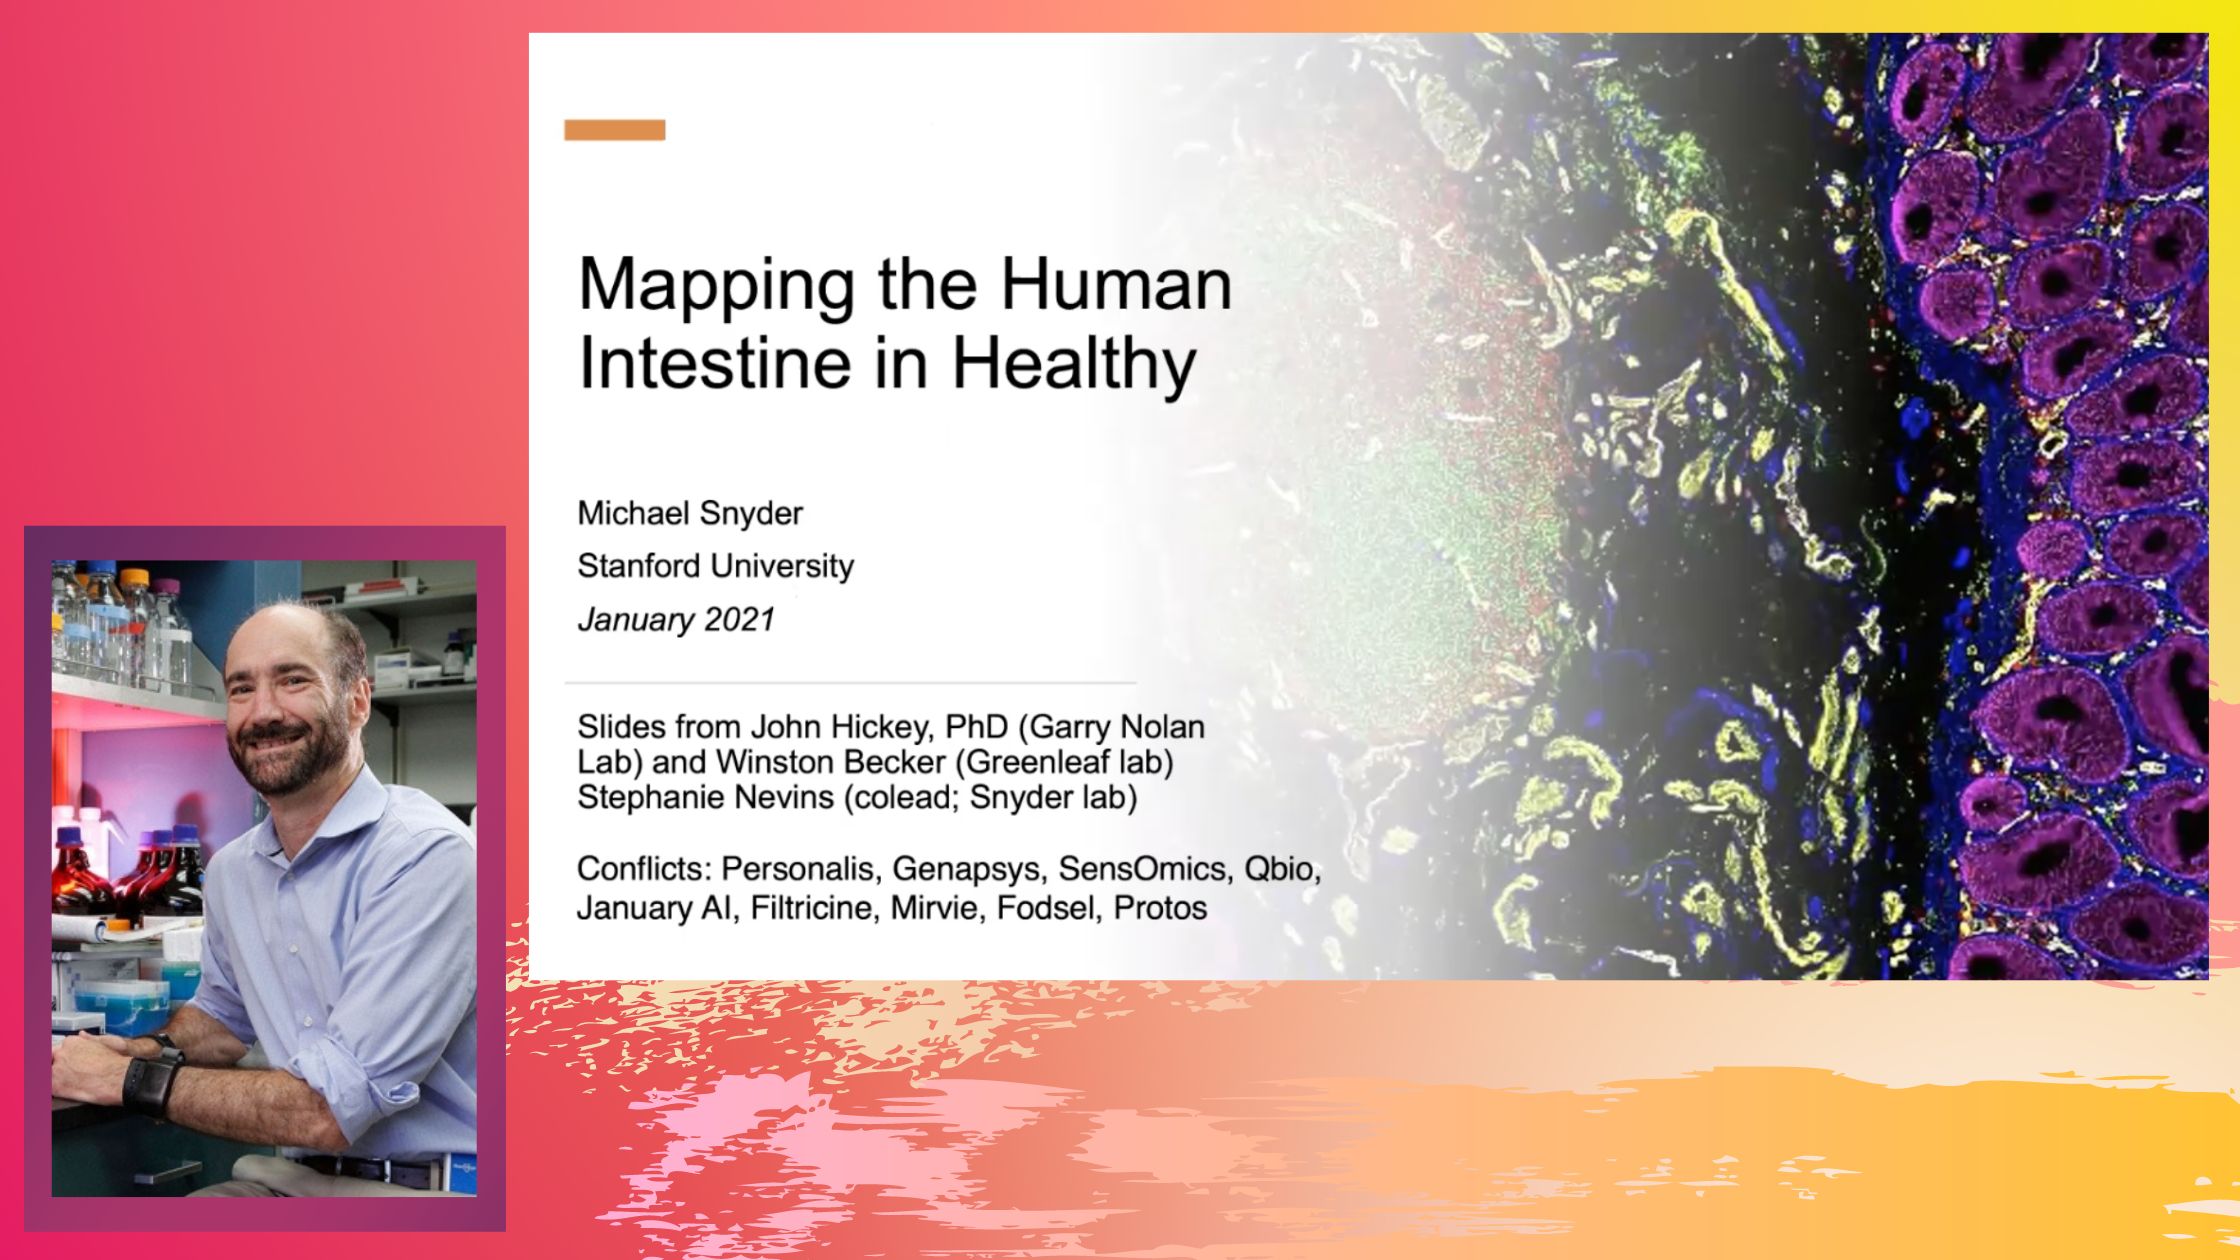 Spatial Mapping the Human Intestine by Dr. Mike Snyder